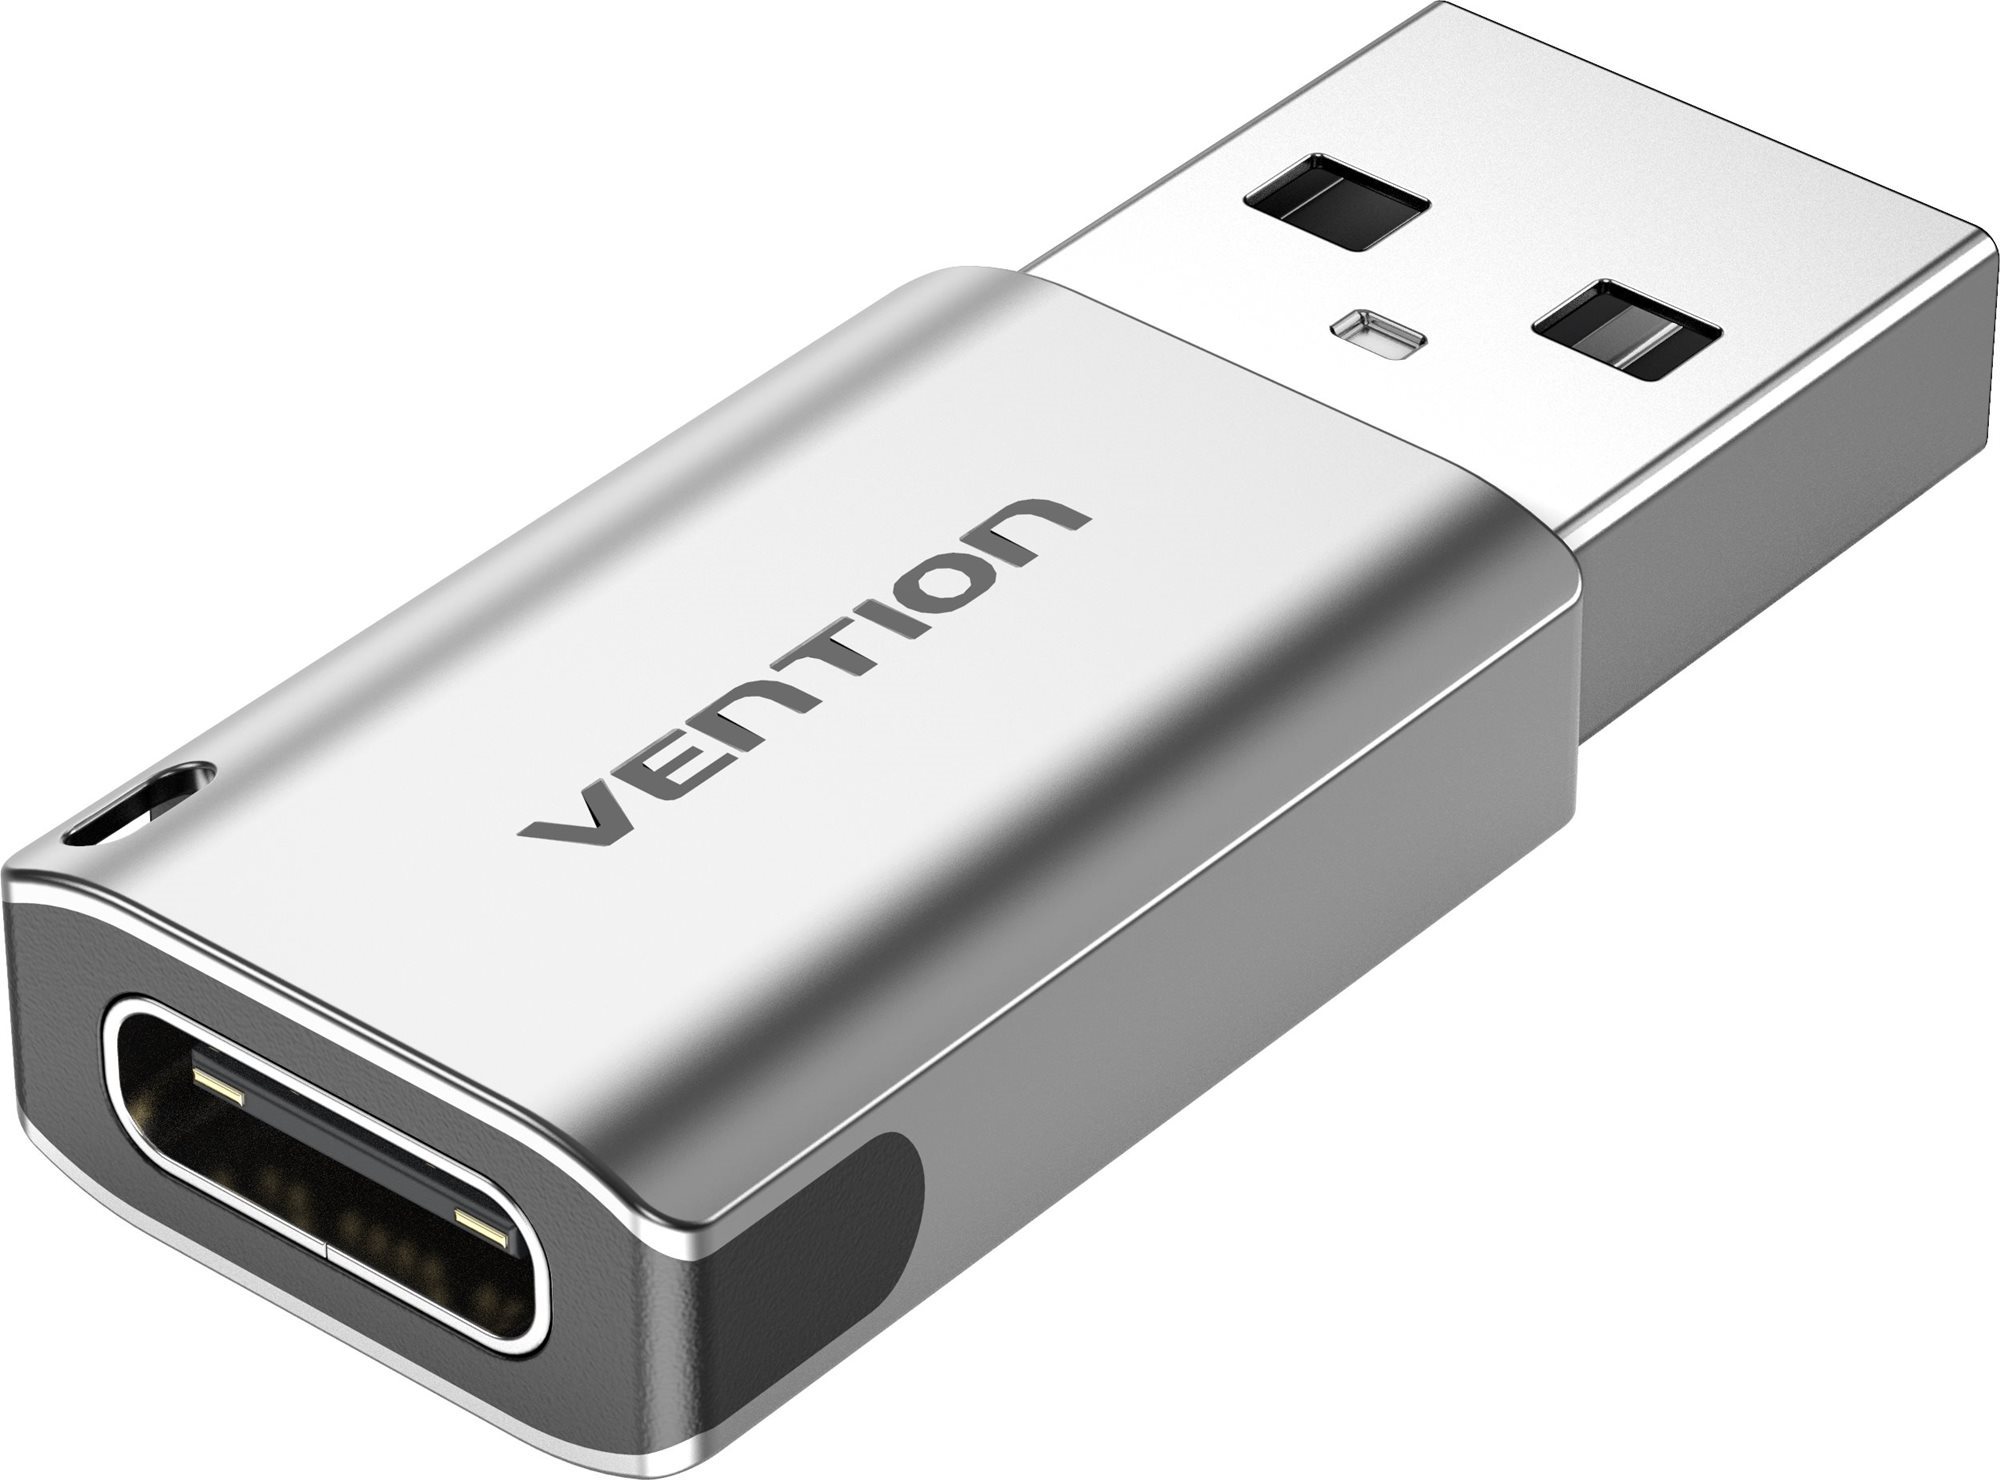 Vention USB 3.0 (M) to USB-C (F) Adapter Gray Aluminum Alloy Type